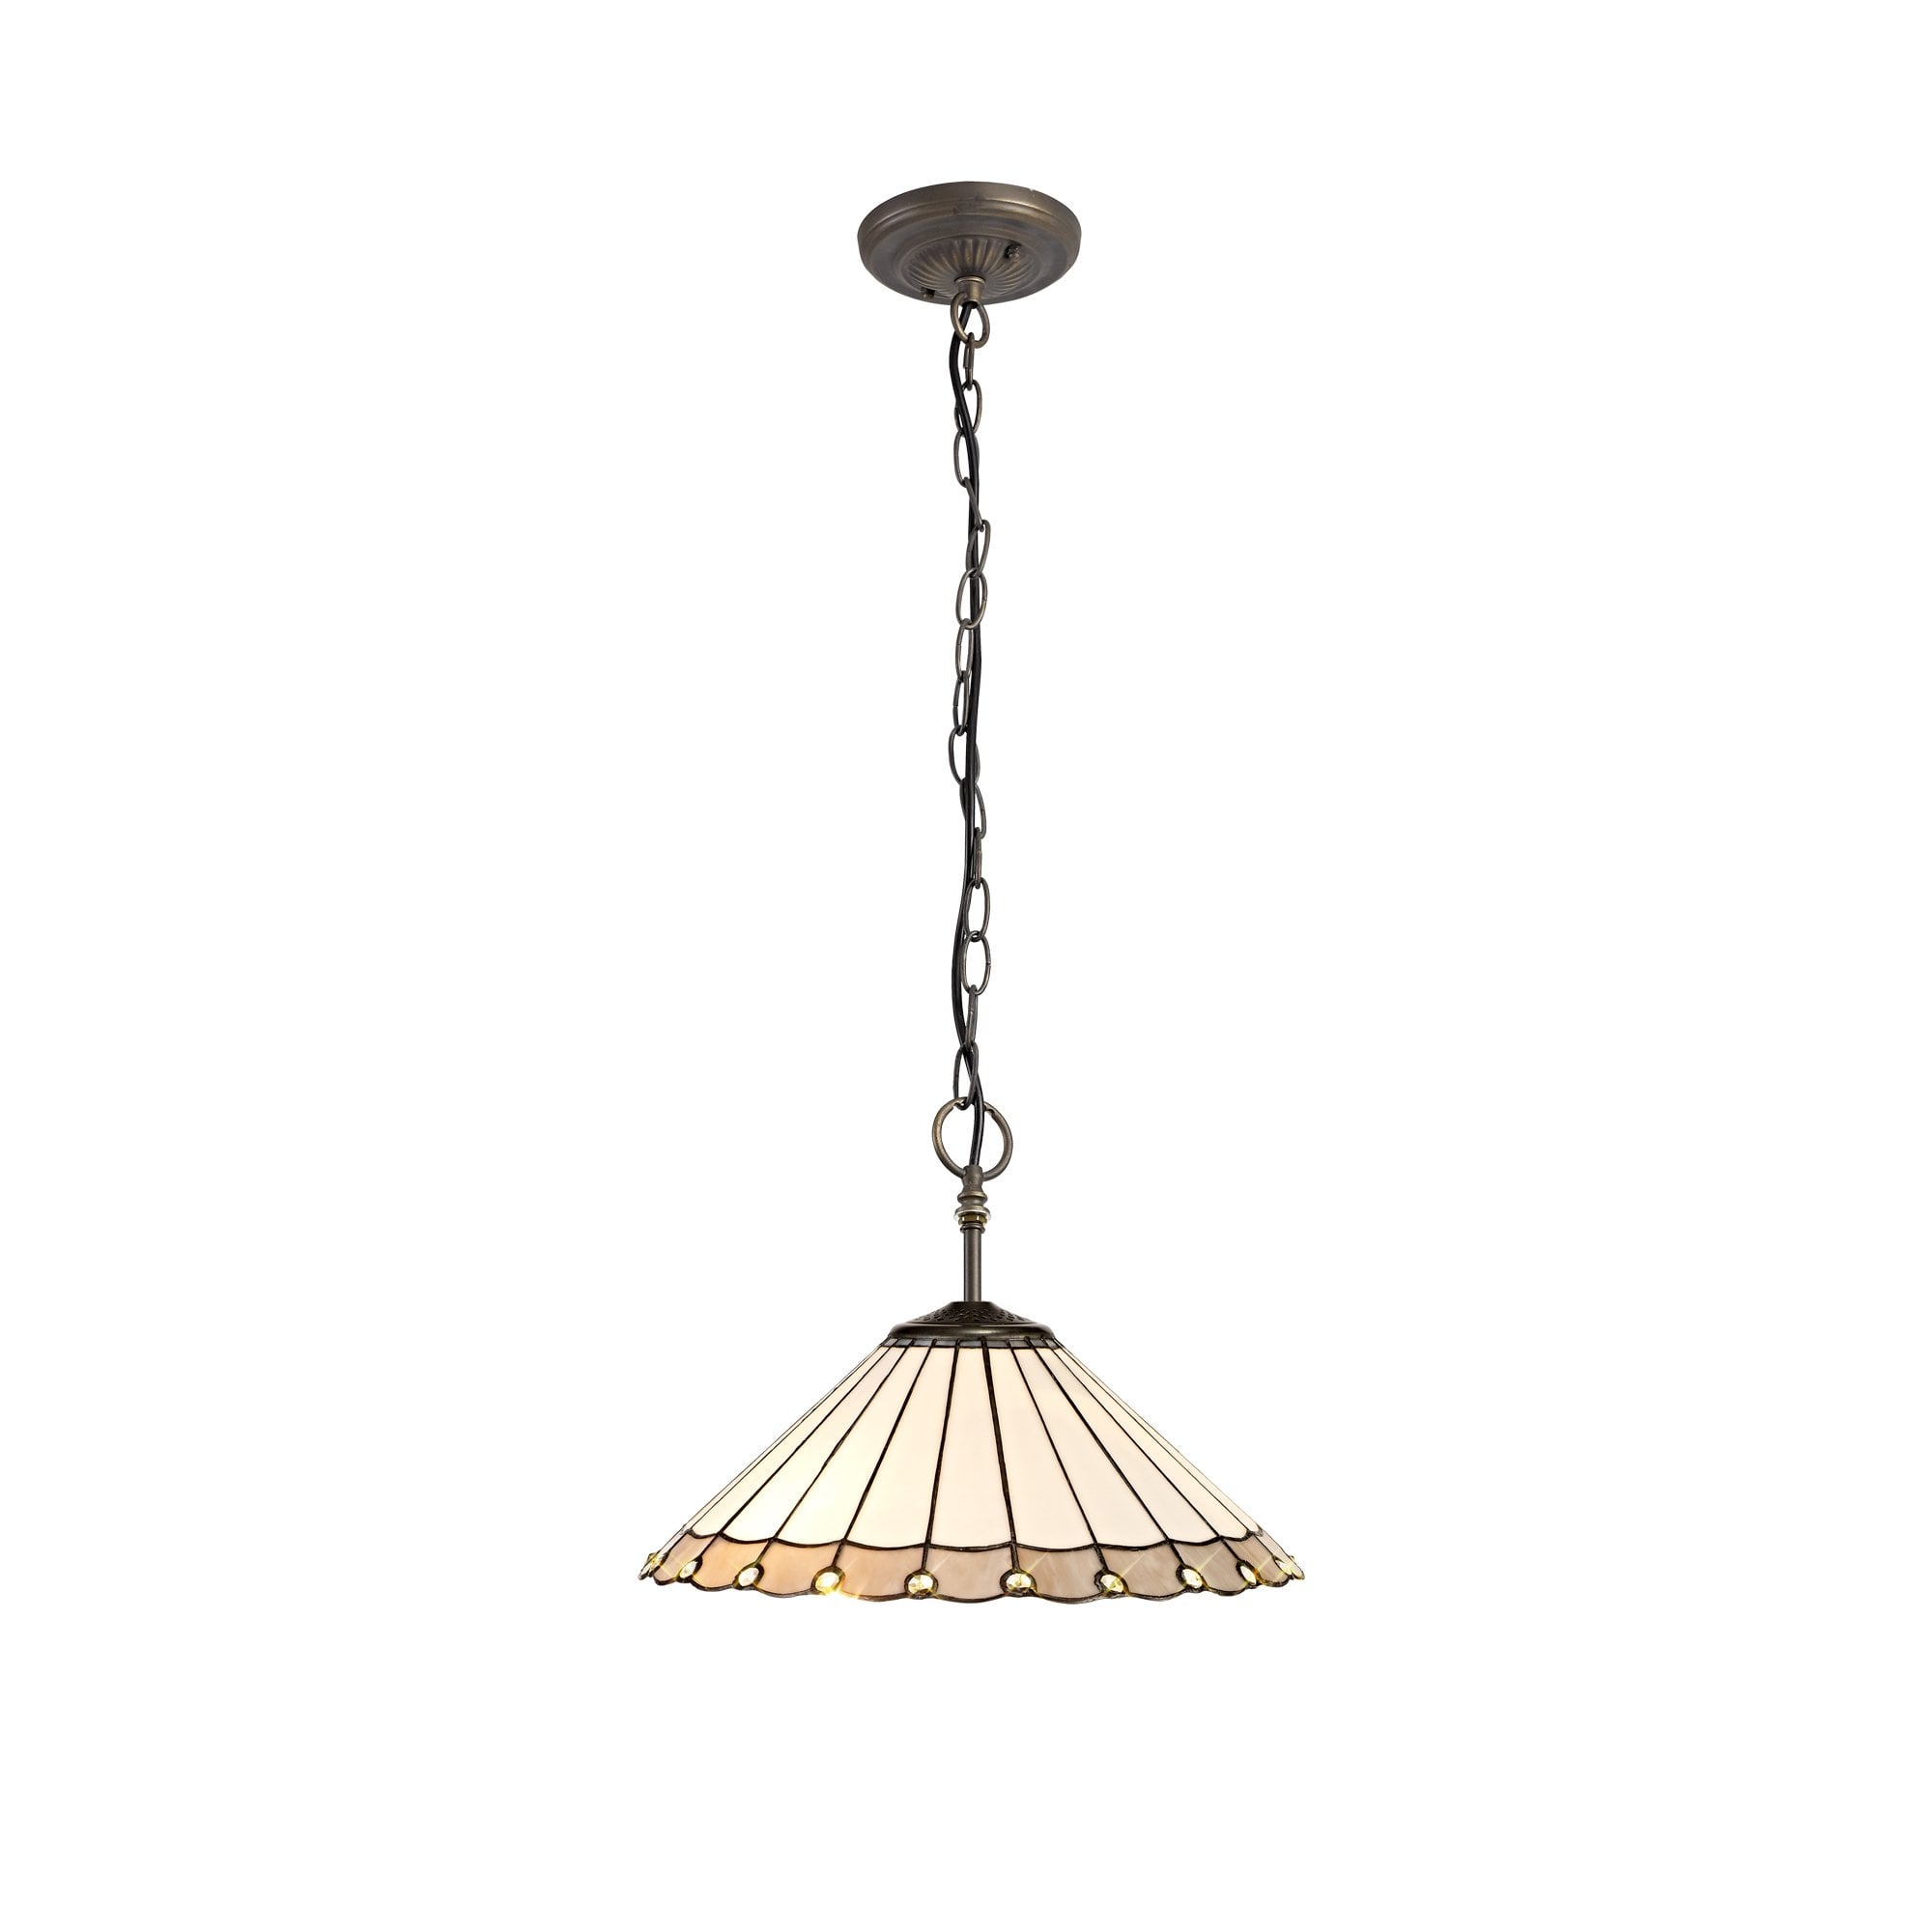 3 Light Downlighter Pendant E27 With 40cm Tiffany Shade, Grey/Cream/Crystal/Aged Antique Brass